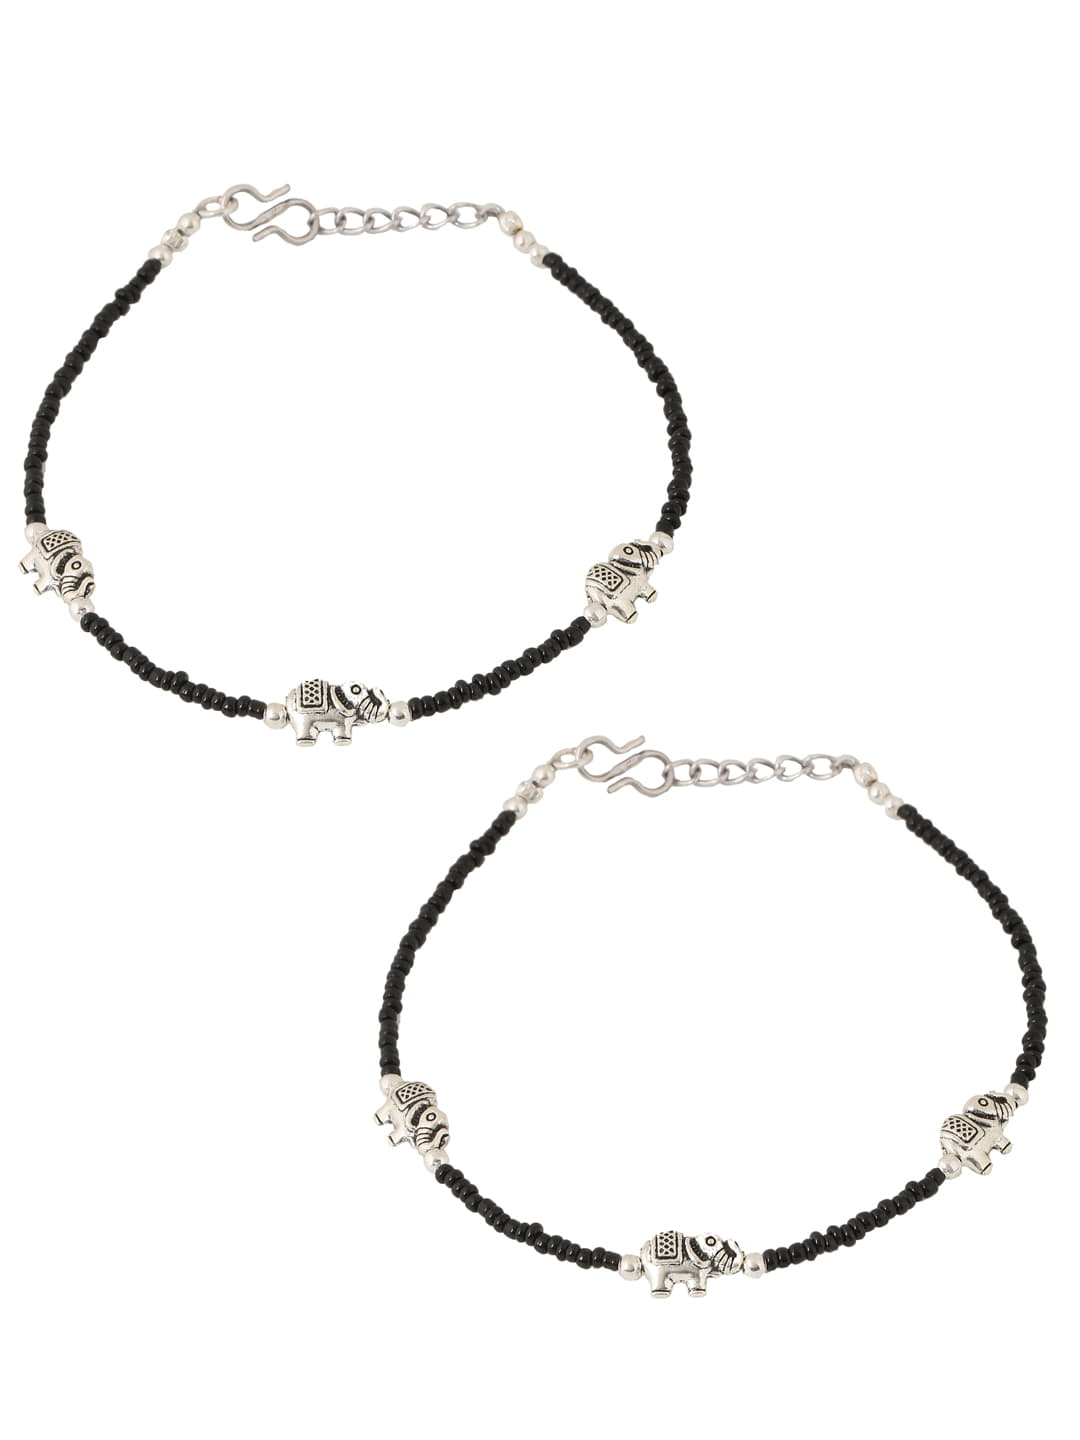 elephant-shape-anklet-with-black-beads-viraasi